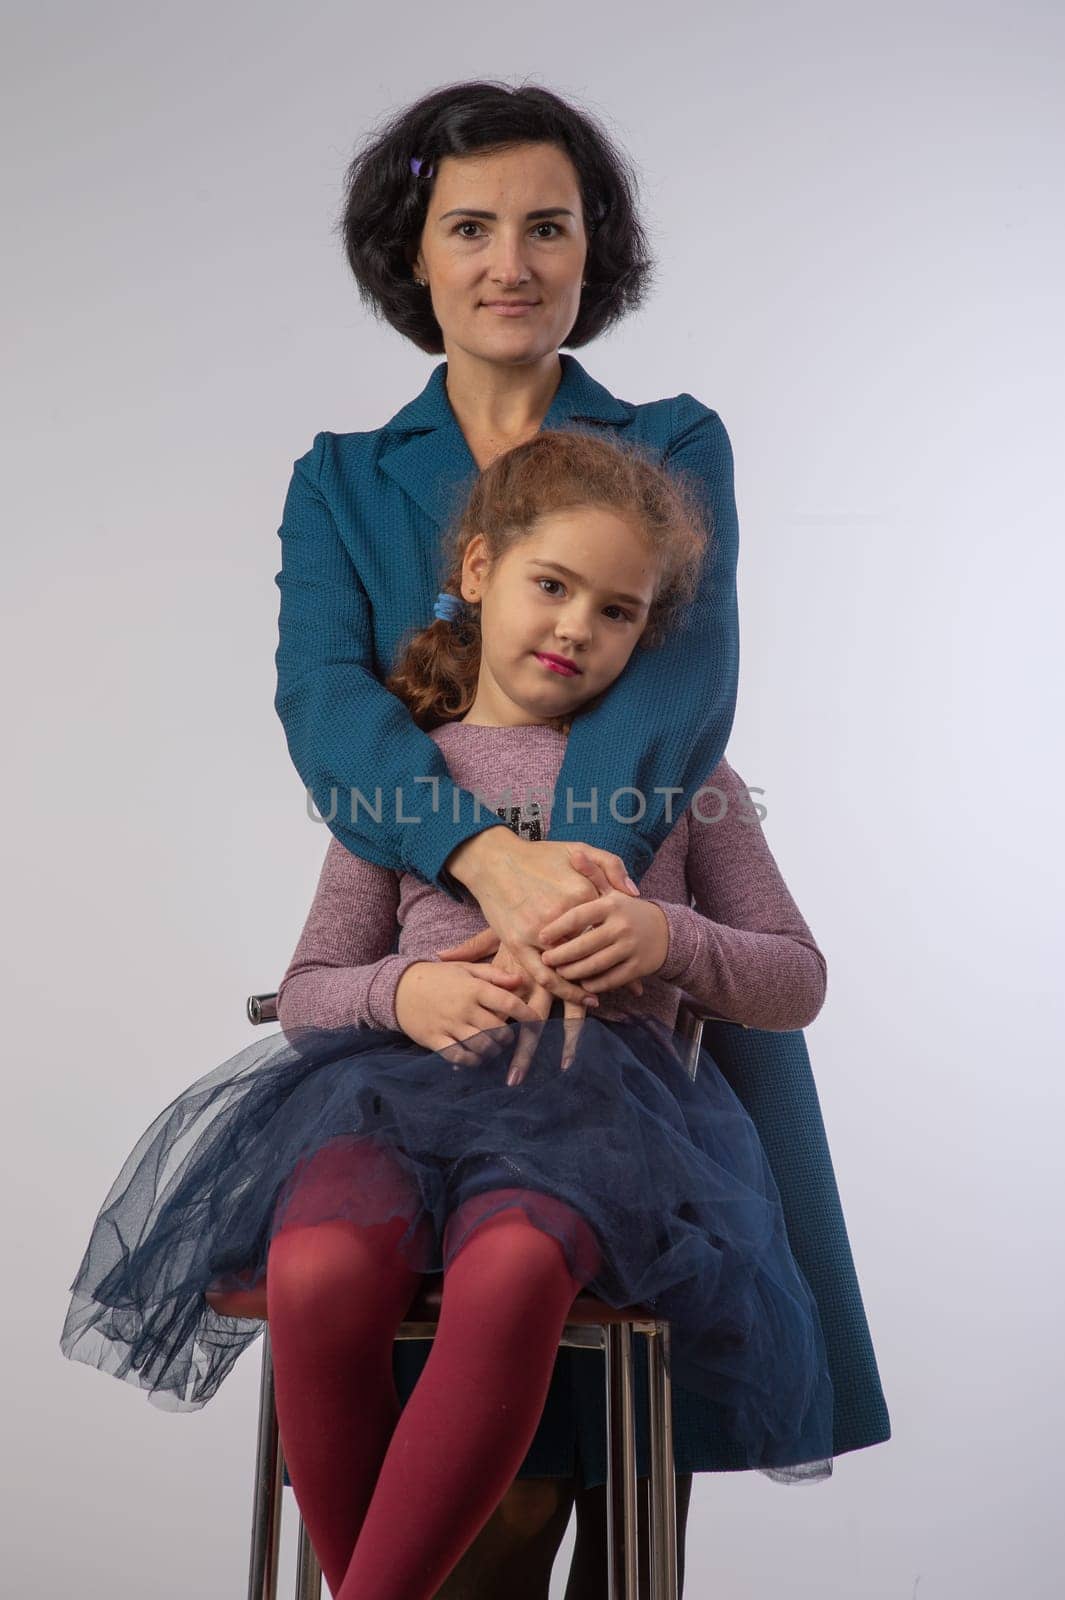 mother and daughter studio portrait happy family 2 by Mixa74